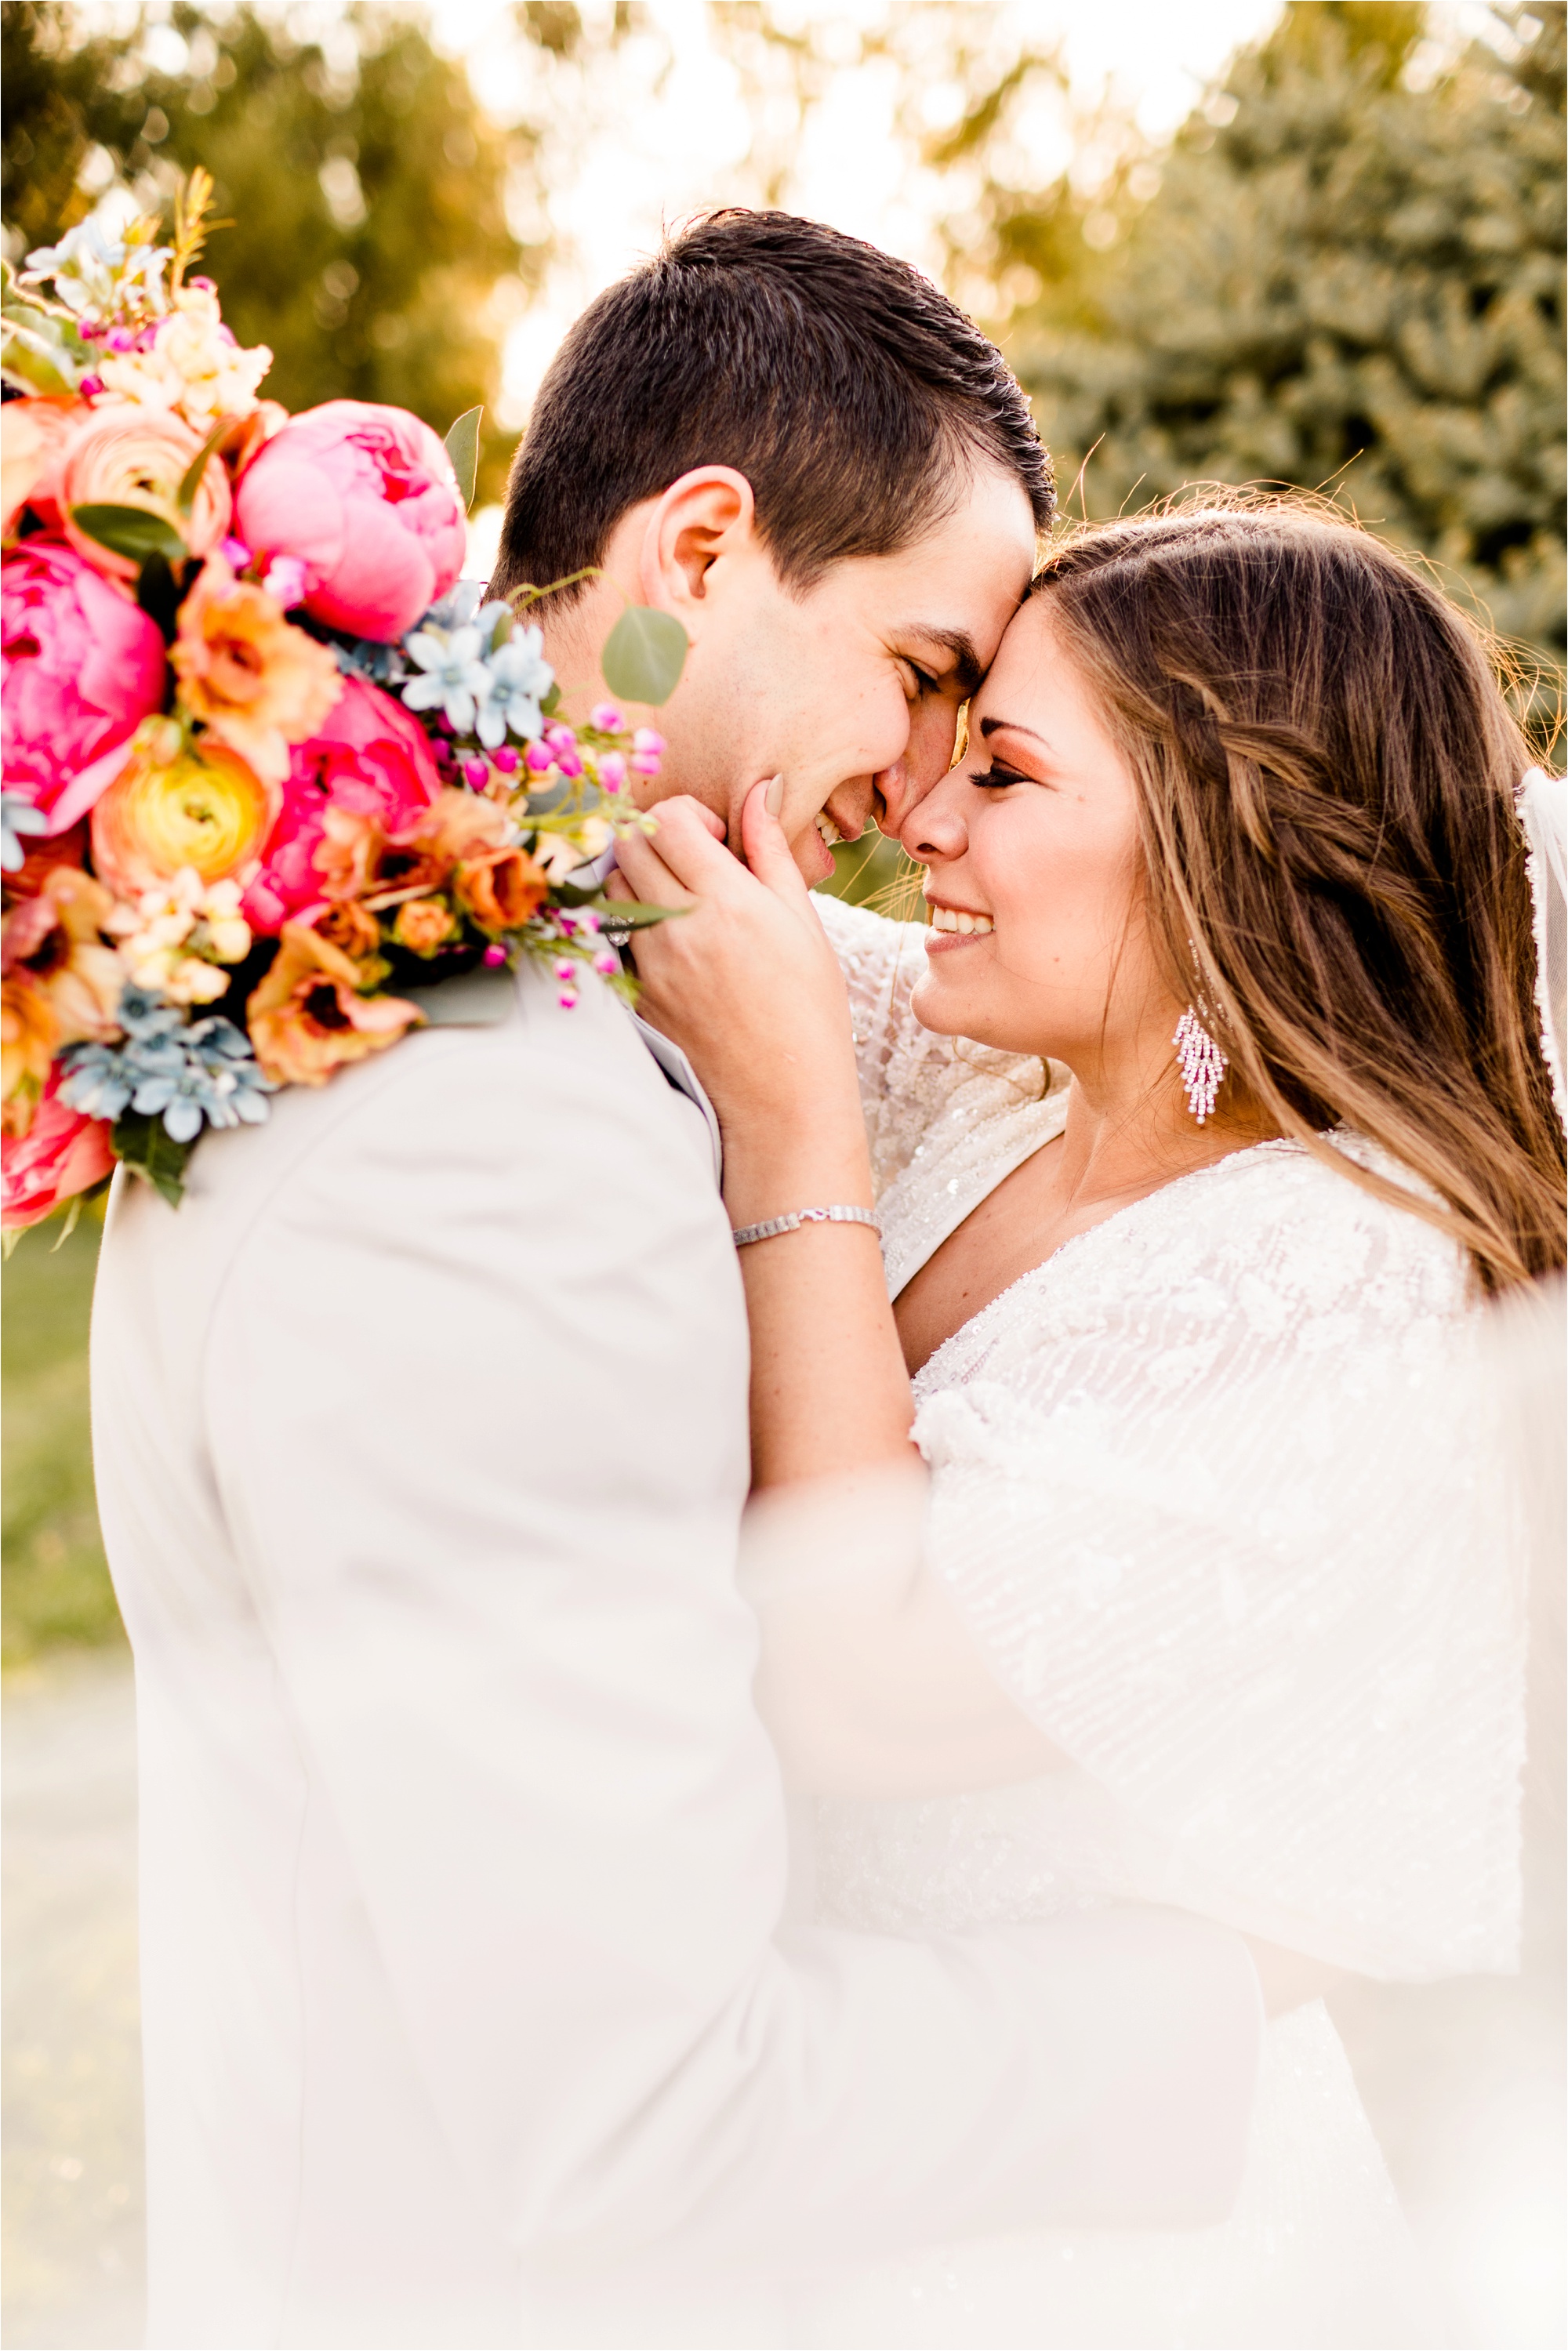 Caitlin and Luke Photography, Illinois Wedding Photographers, Champaign Wedding Photographers, Bloomington Normal Wedding Photographers, Romantic Red and Pink Sunset Styled Shoot_9567.jpg